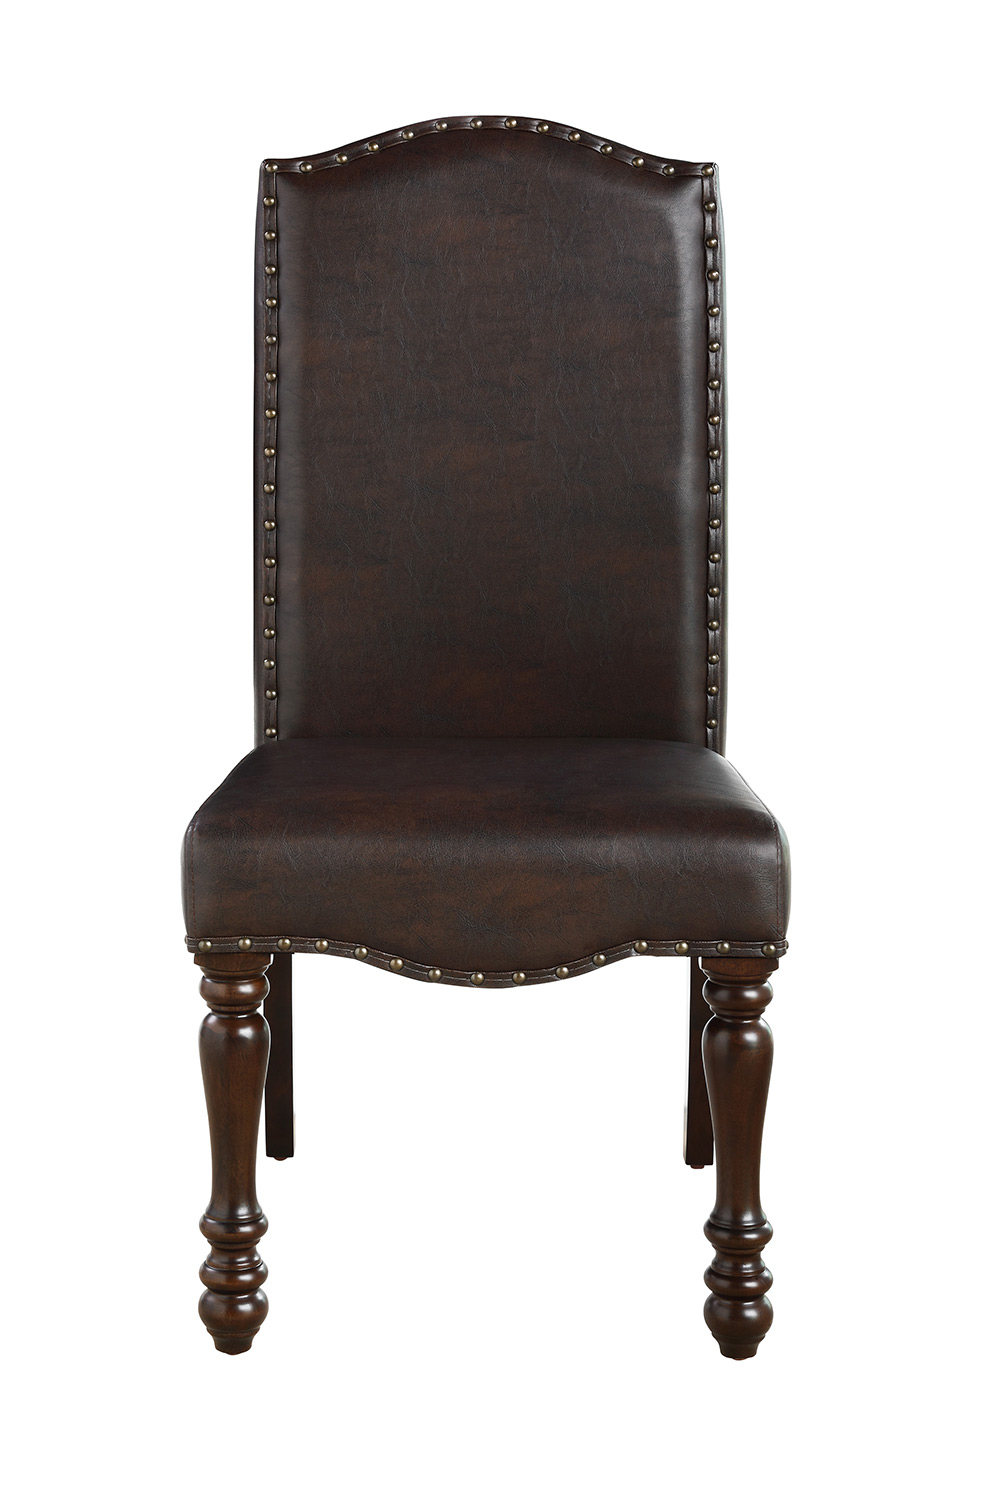 Homelegance Hargreave Side Chair - Cherry